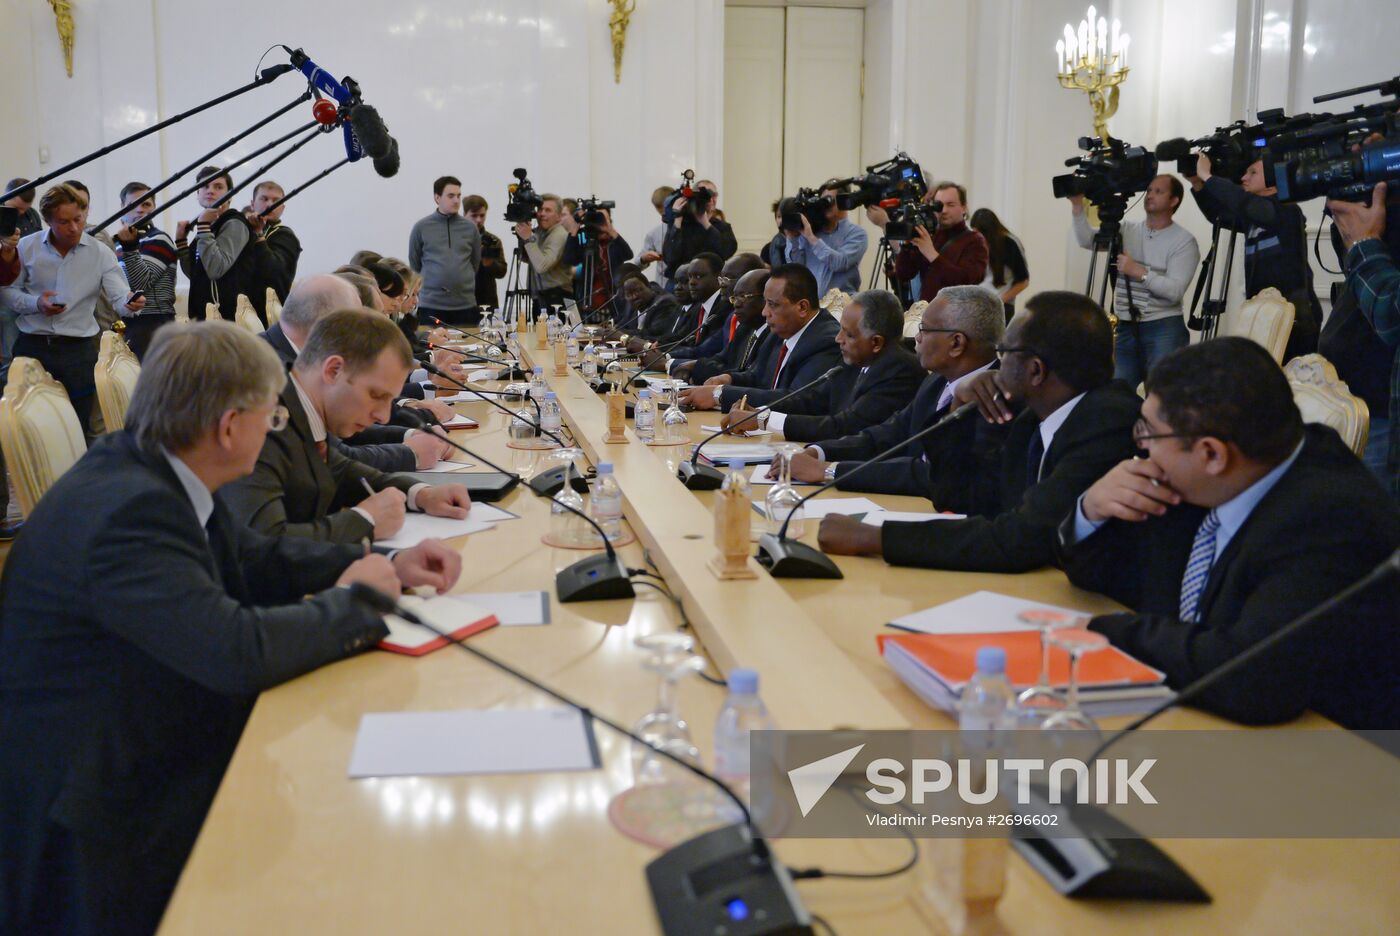 Russian Foreign Minister Lavrov meets Foreign Minister of Sudan Ghandour